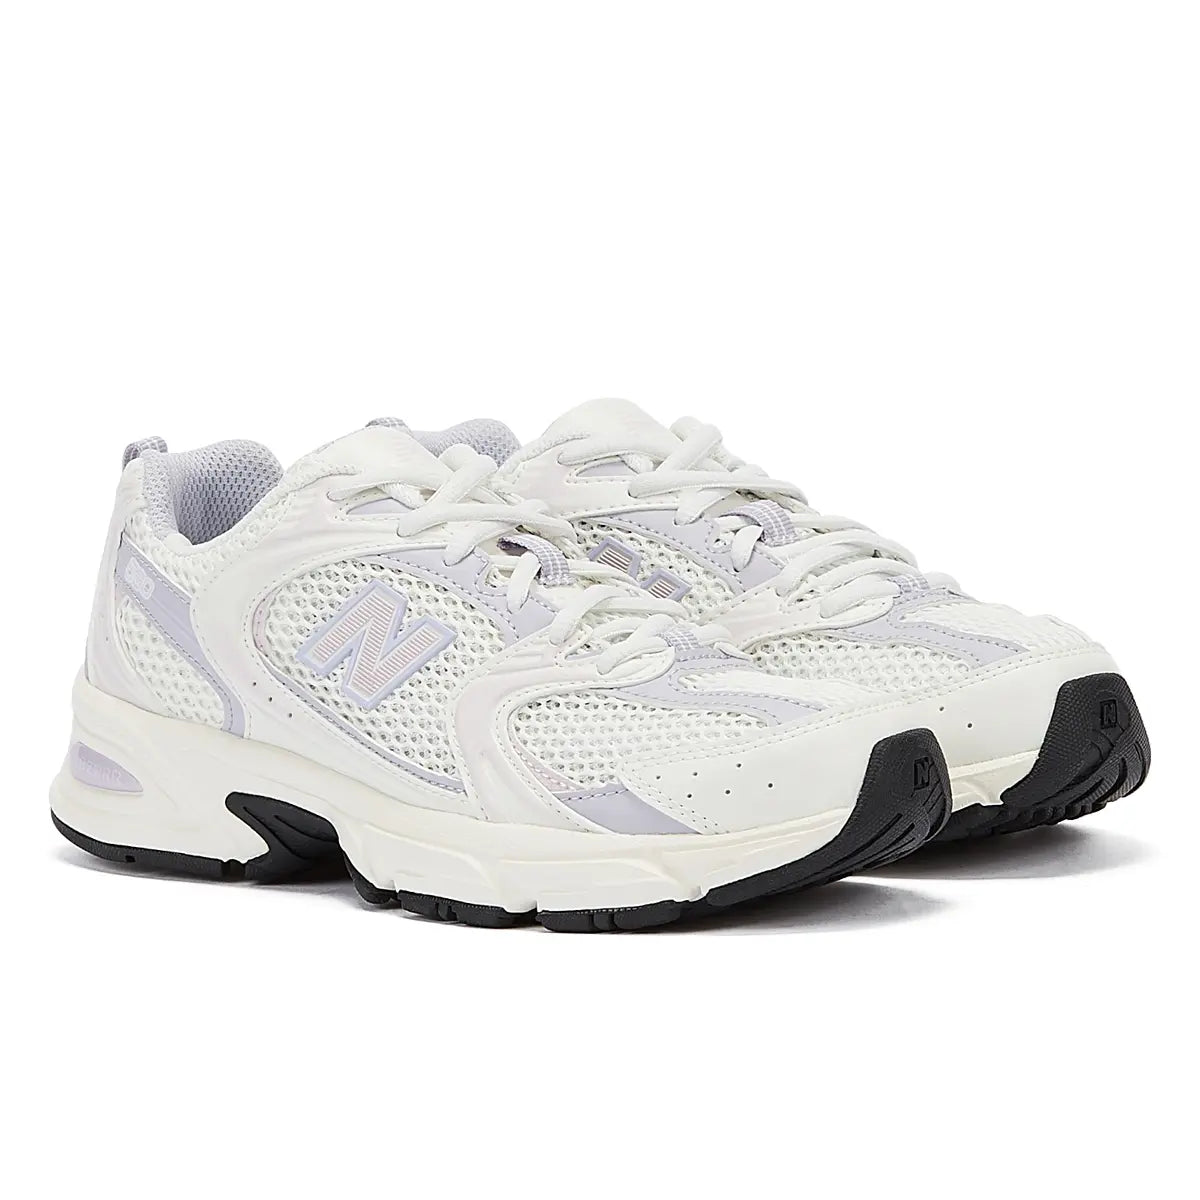 New Balance 530 Women’s White/Lilac Trainers